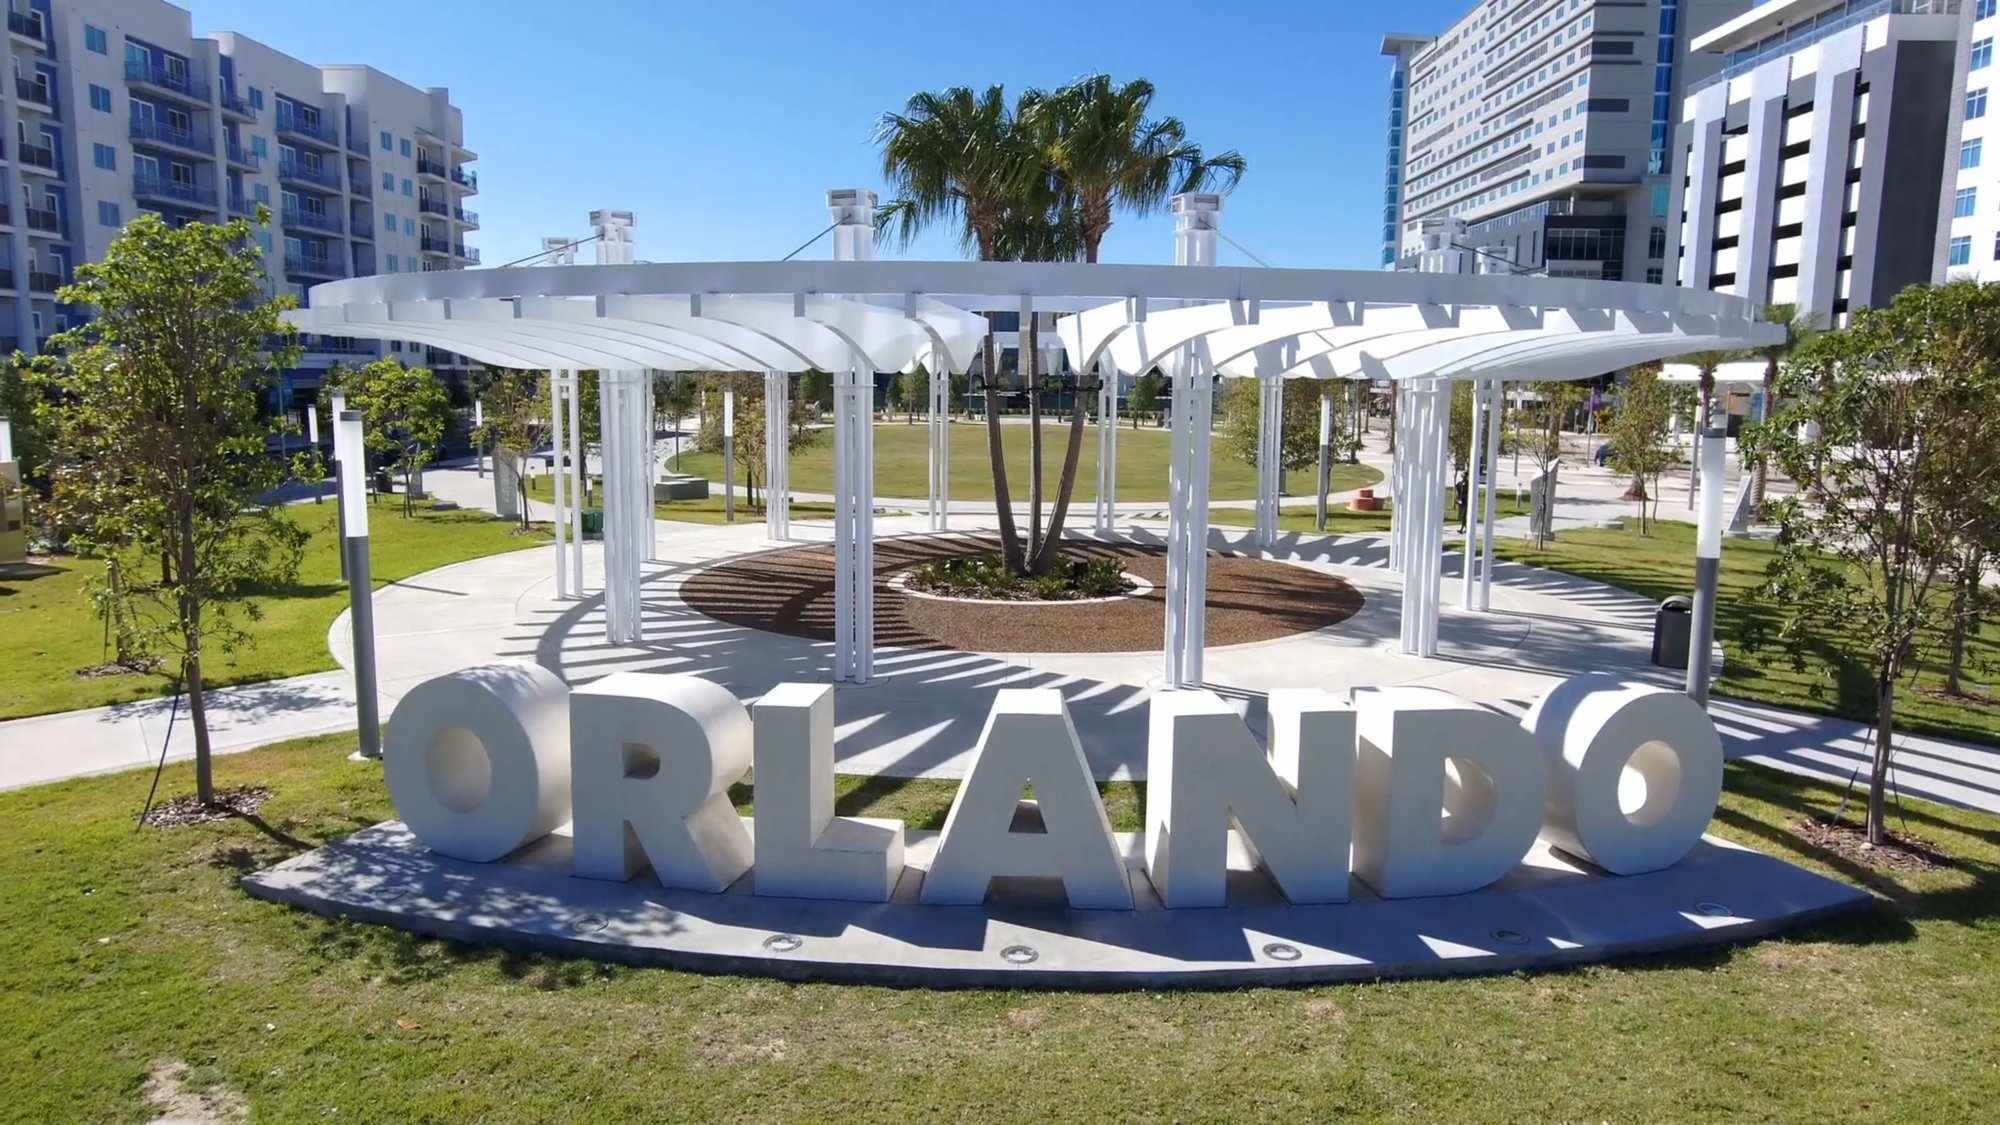 Orlando park and sign during daytime